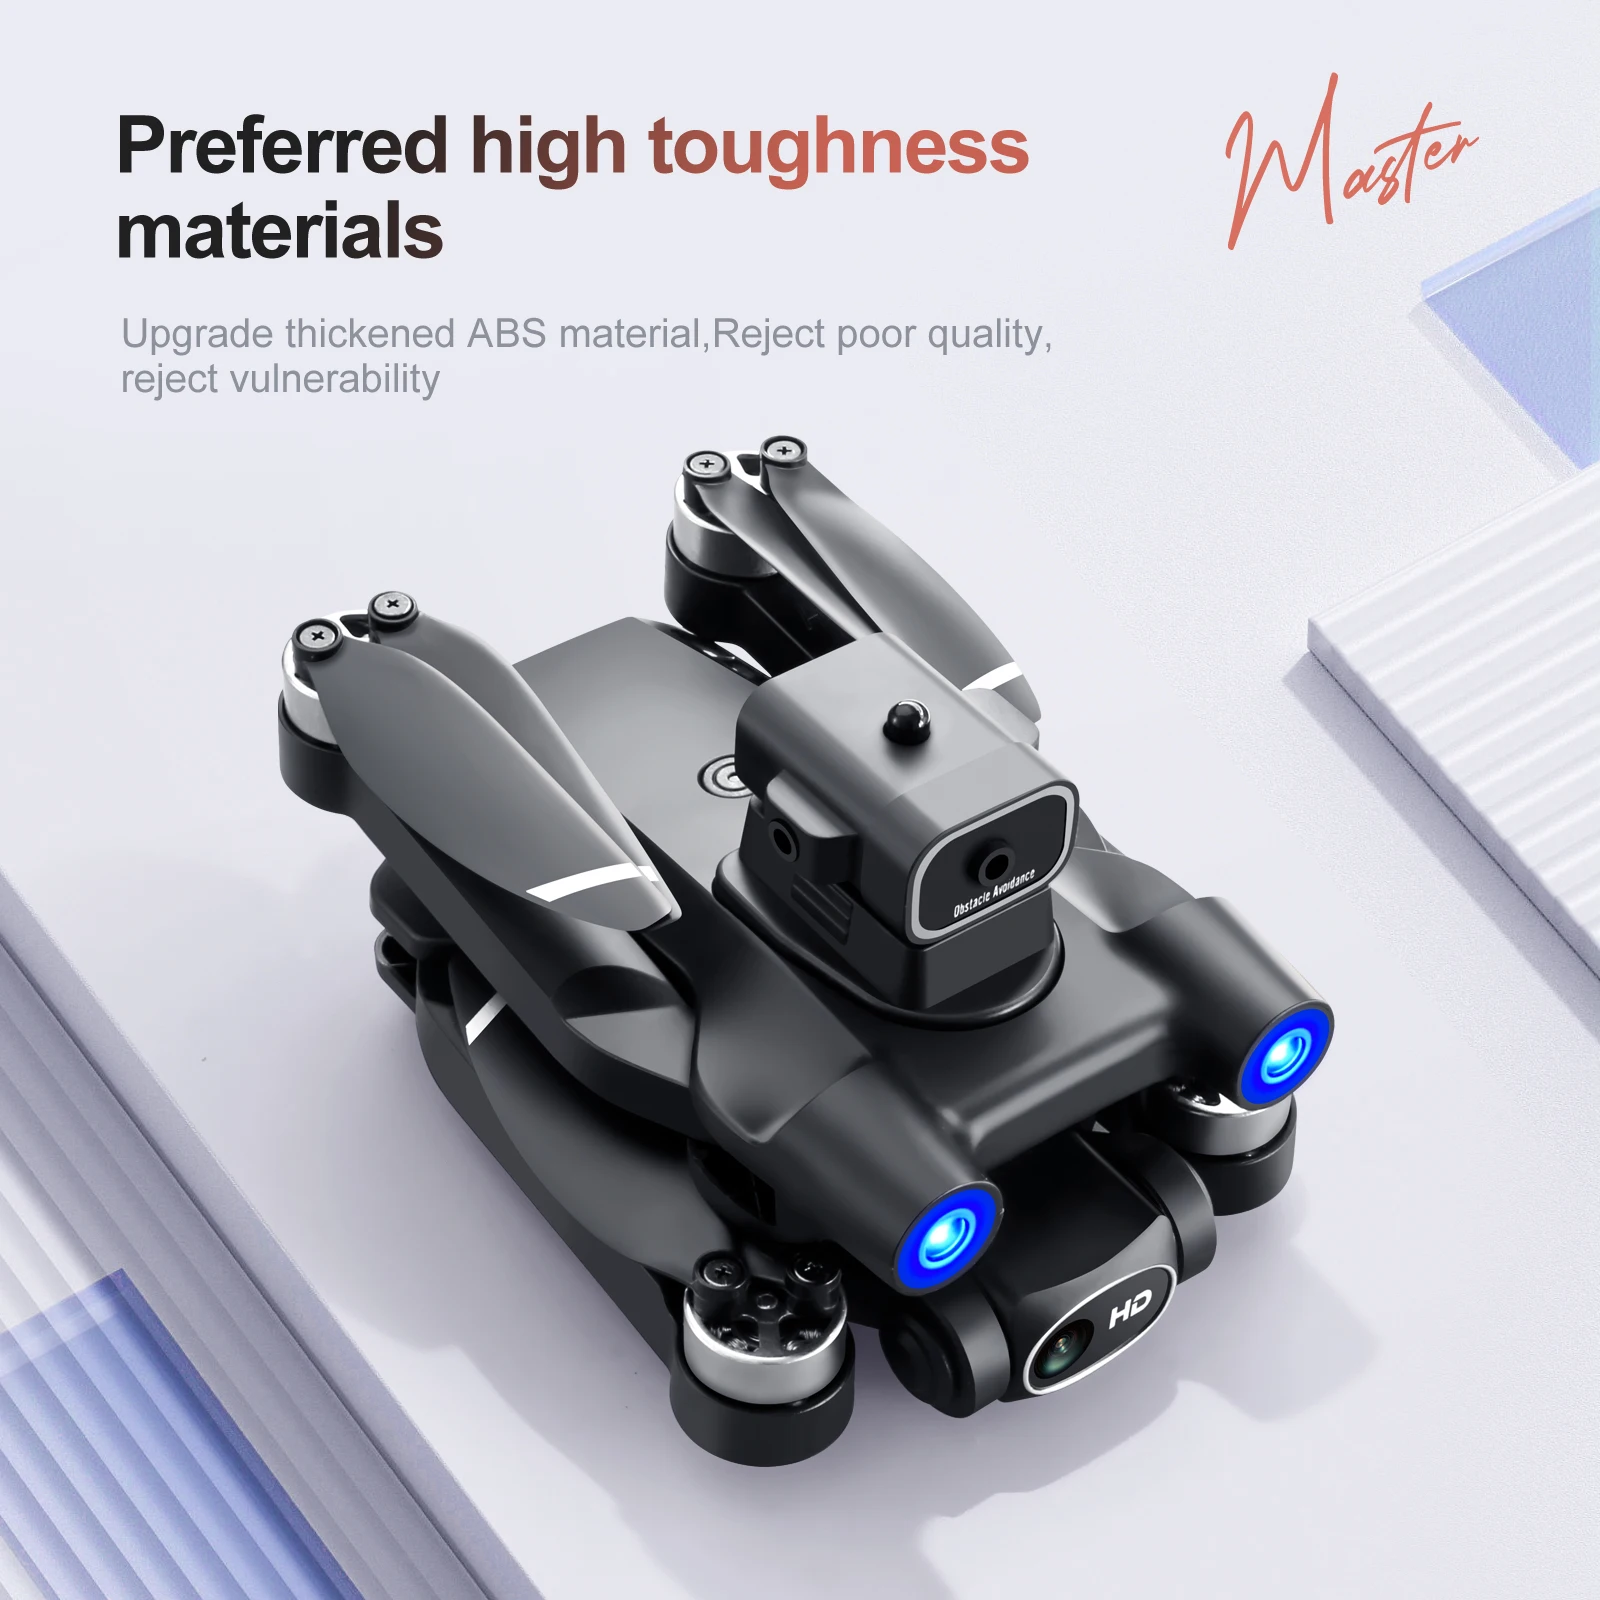 S136 GPS Drone, Preferred high toughness Mor materials Upgrade thickened ABS material,Reject poor quality, reject